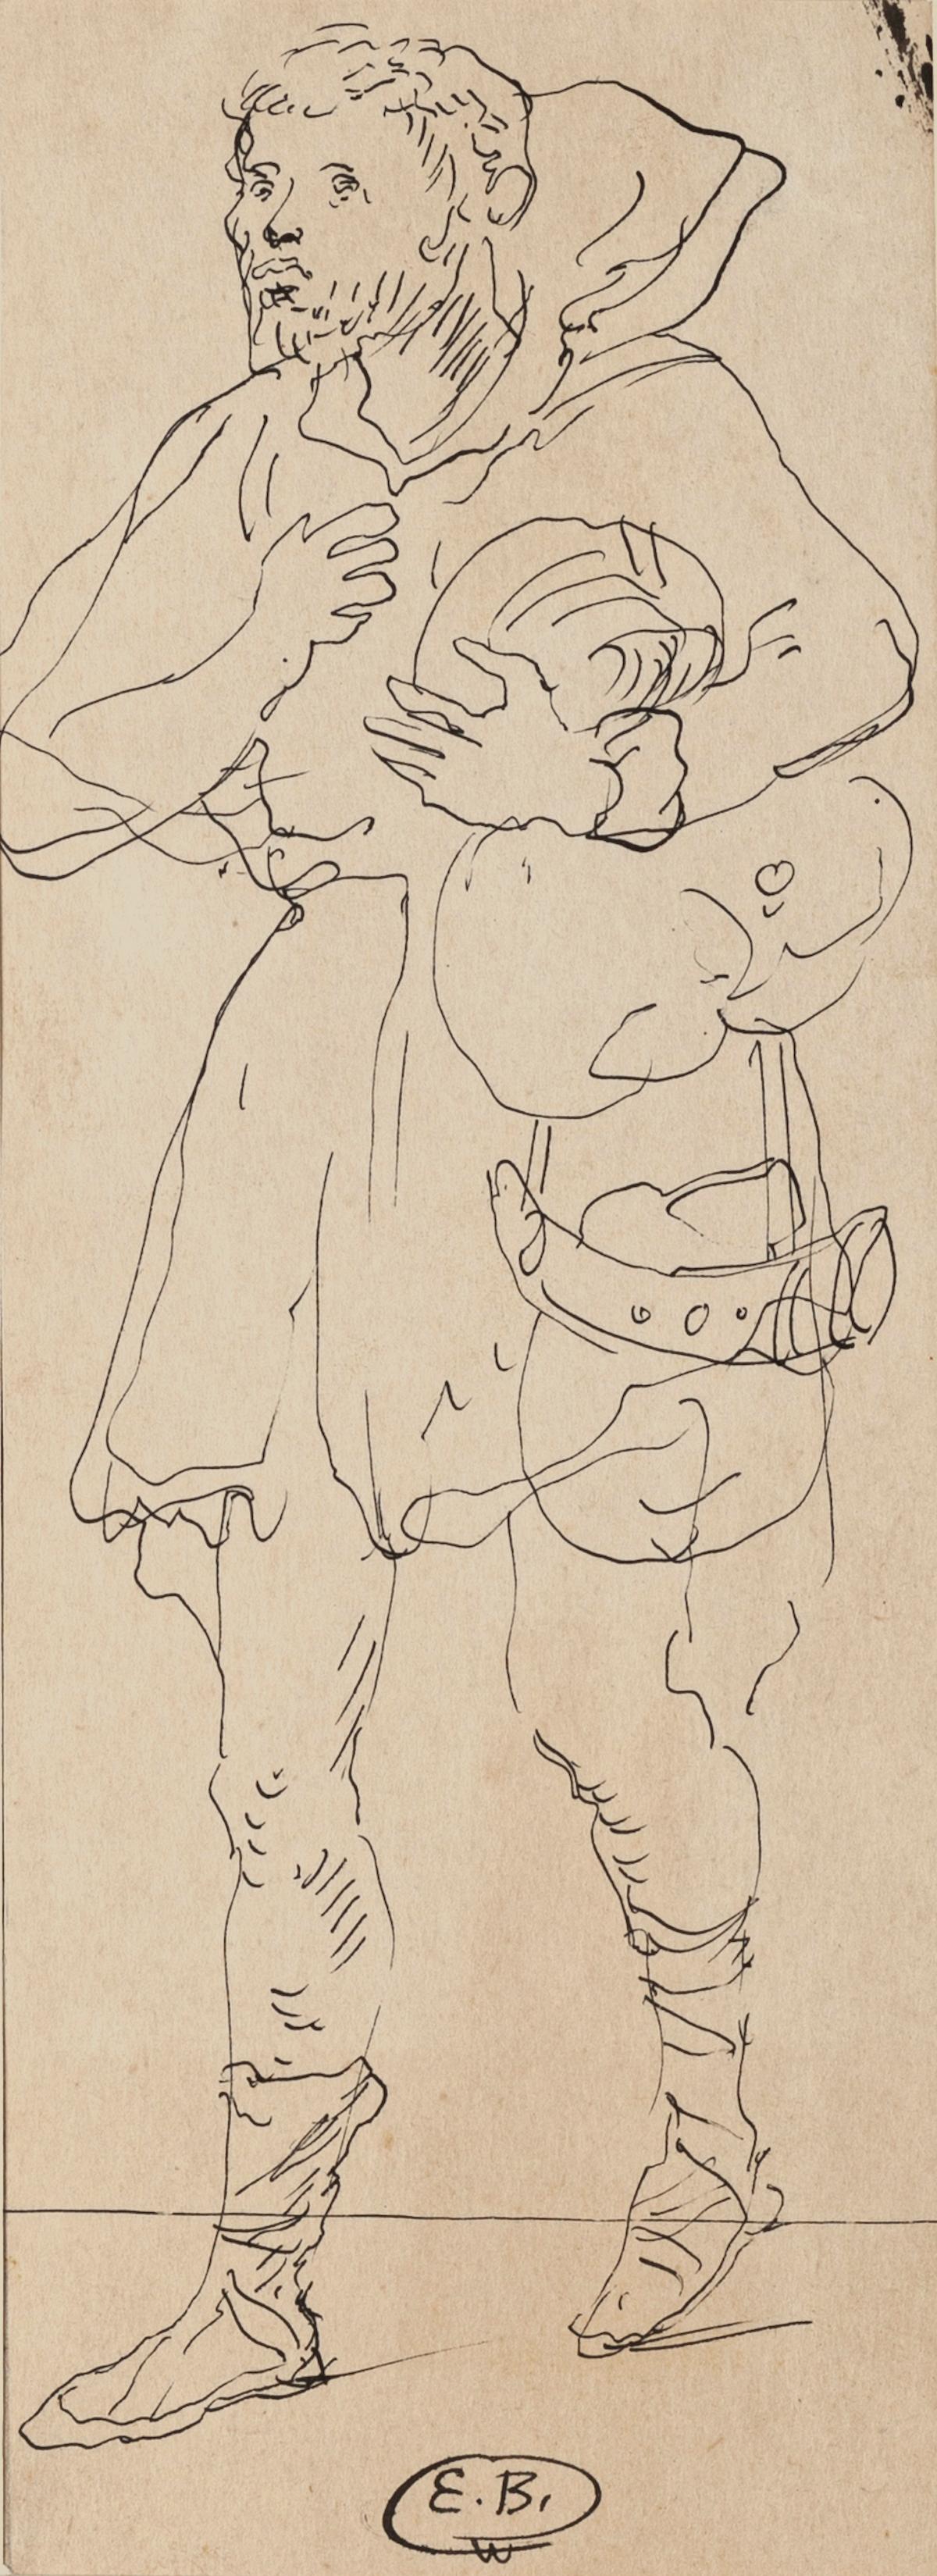 Theatrical Costum is an original monogramm drawing in pencil, realized by Russian scenographer Eugène Berman, hand-signed.

Image Dimension: 35 x 25 cm
Image Dimensions: 22.5 x 8.3 cm

In very good conditions. 

The artwork represents a Theatrical